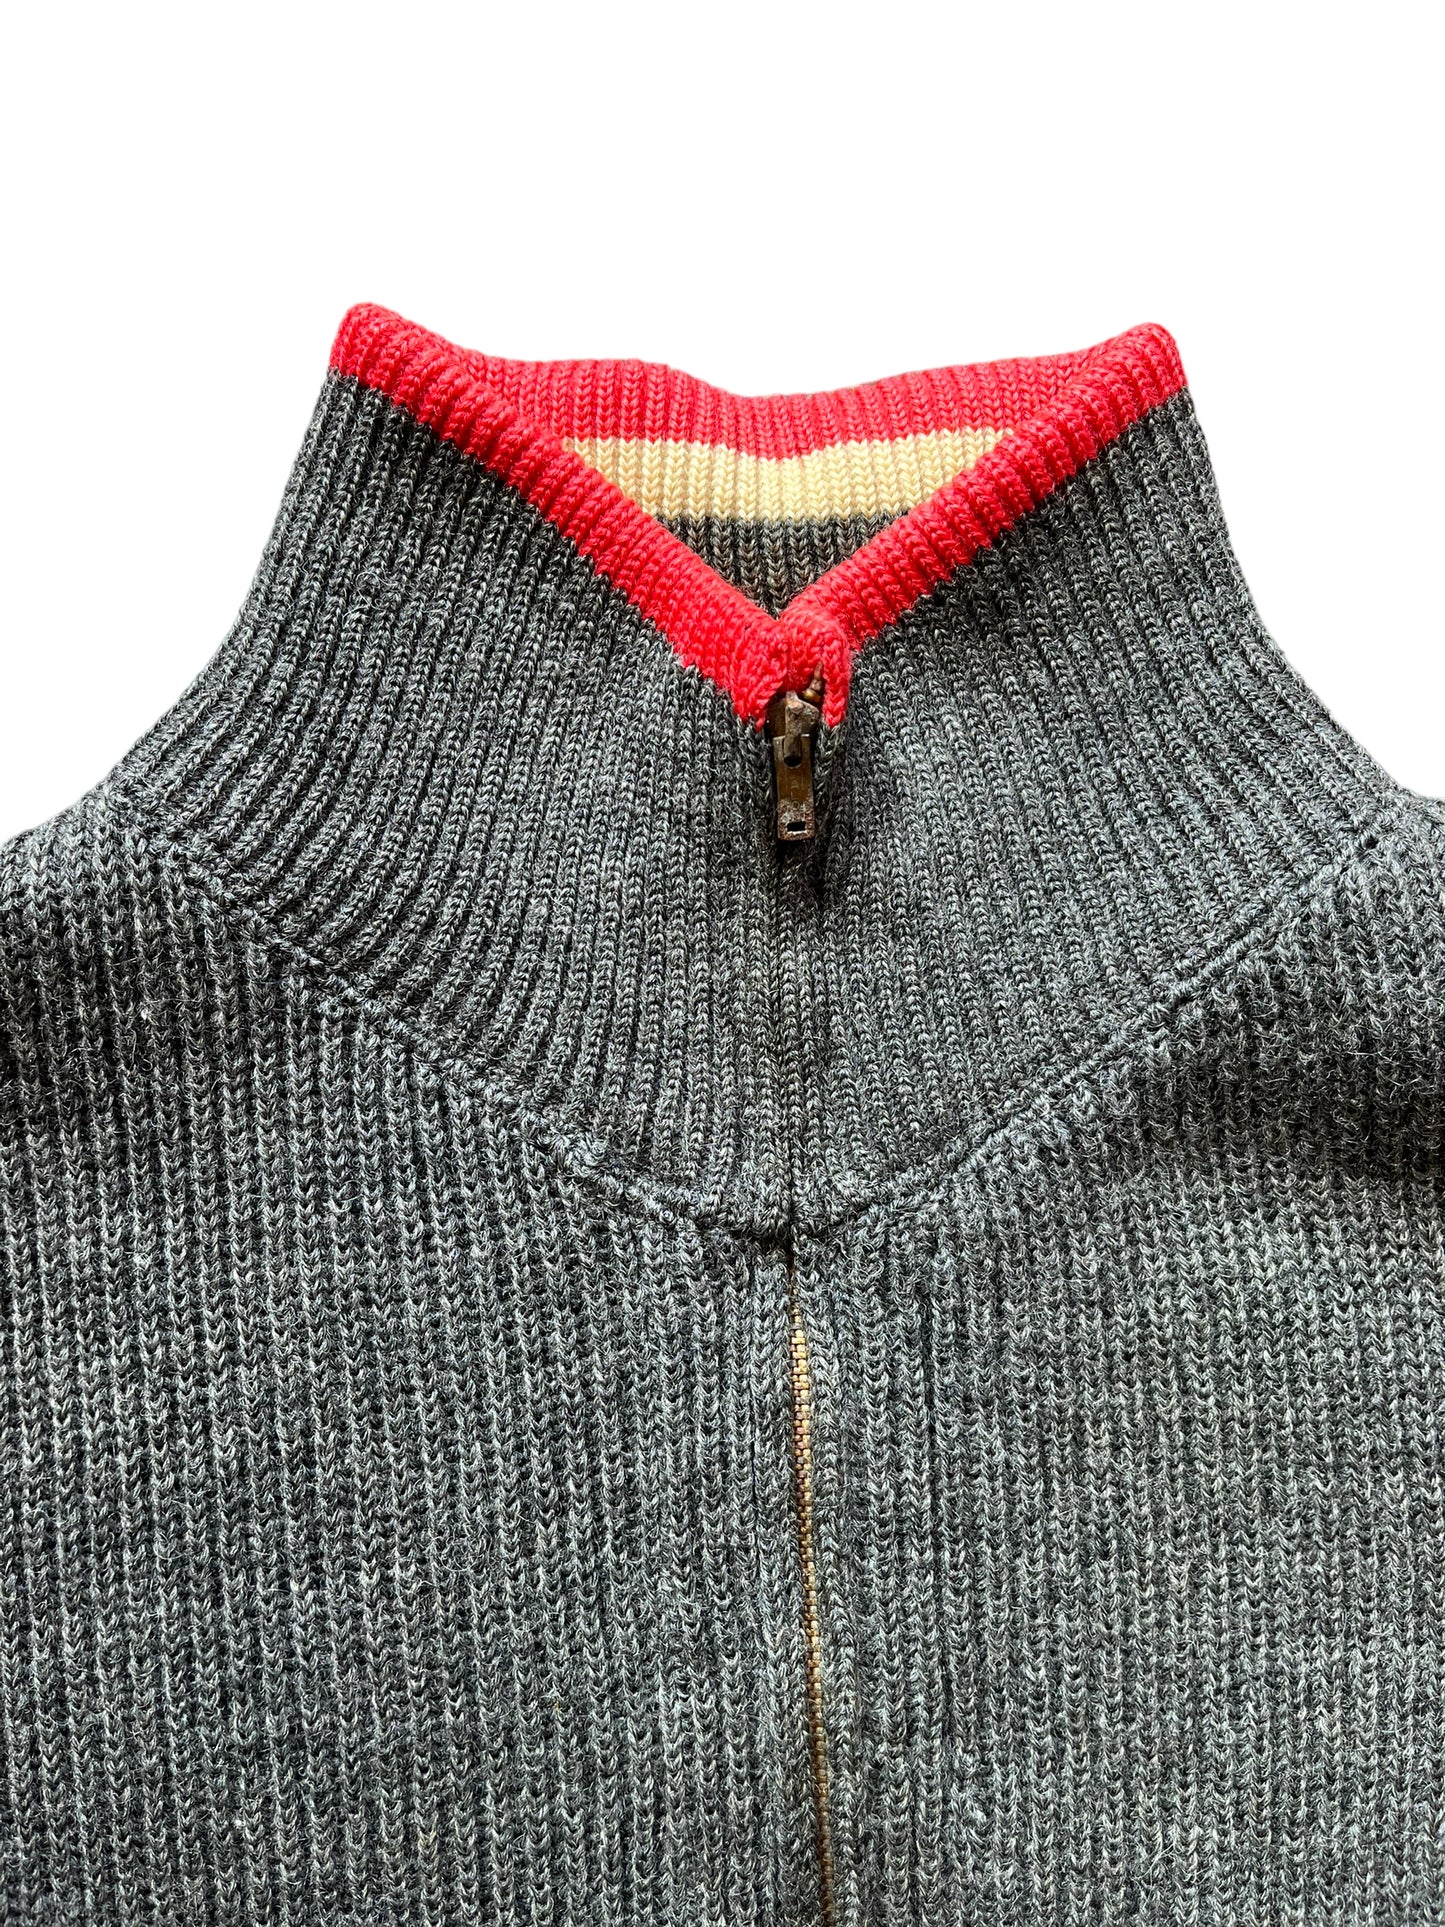 Vintage 1950s Lasley-Seattle Avalanche Zip-up Sweater | Barn Owl Sweaters | Seattle Vintage